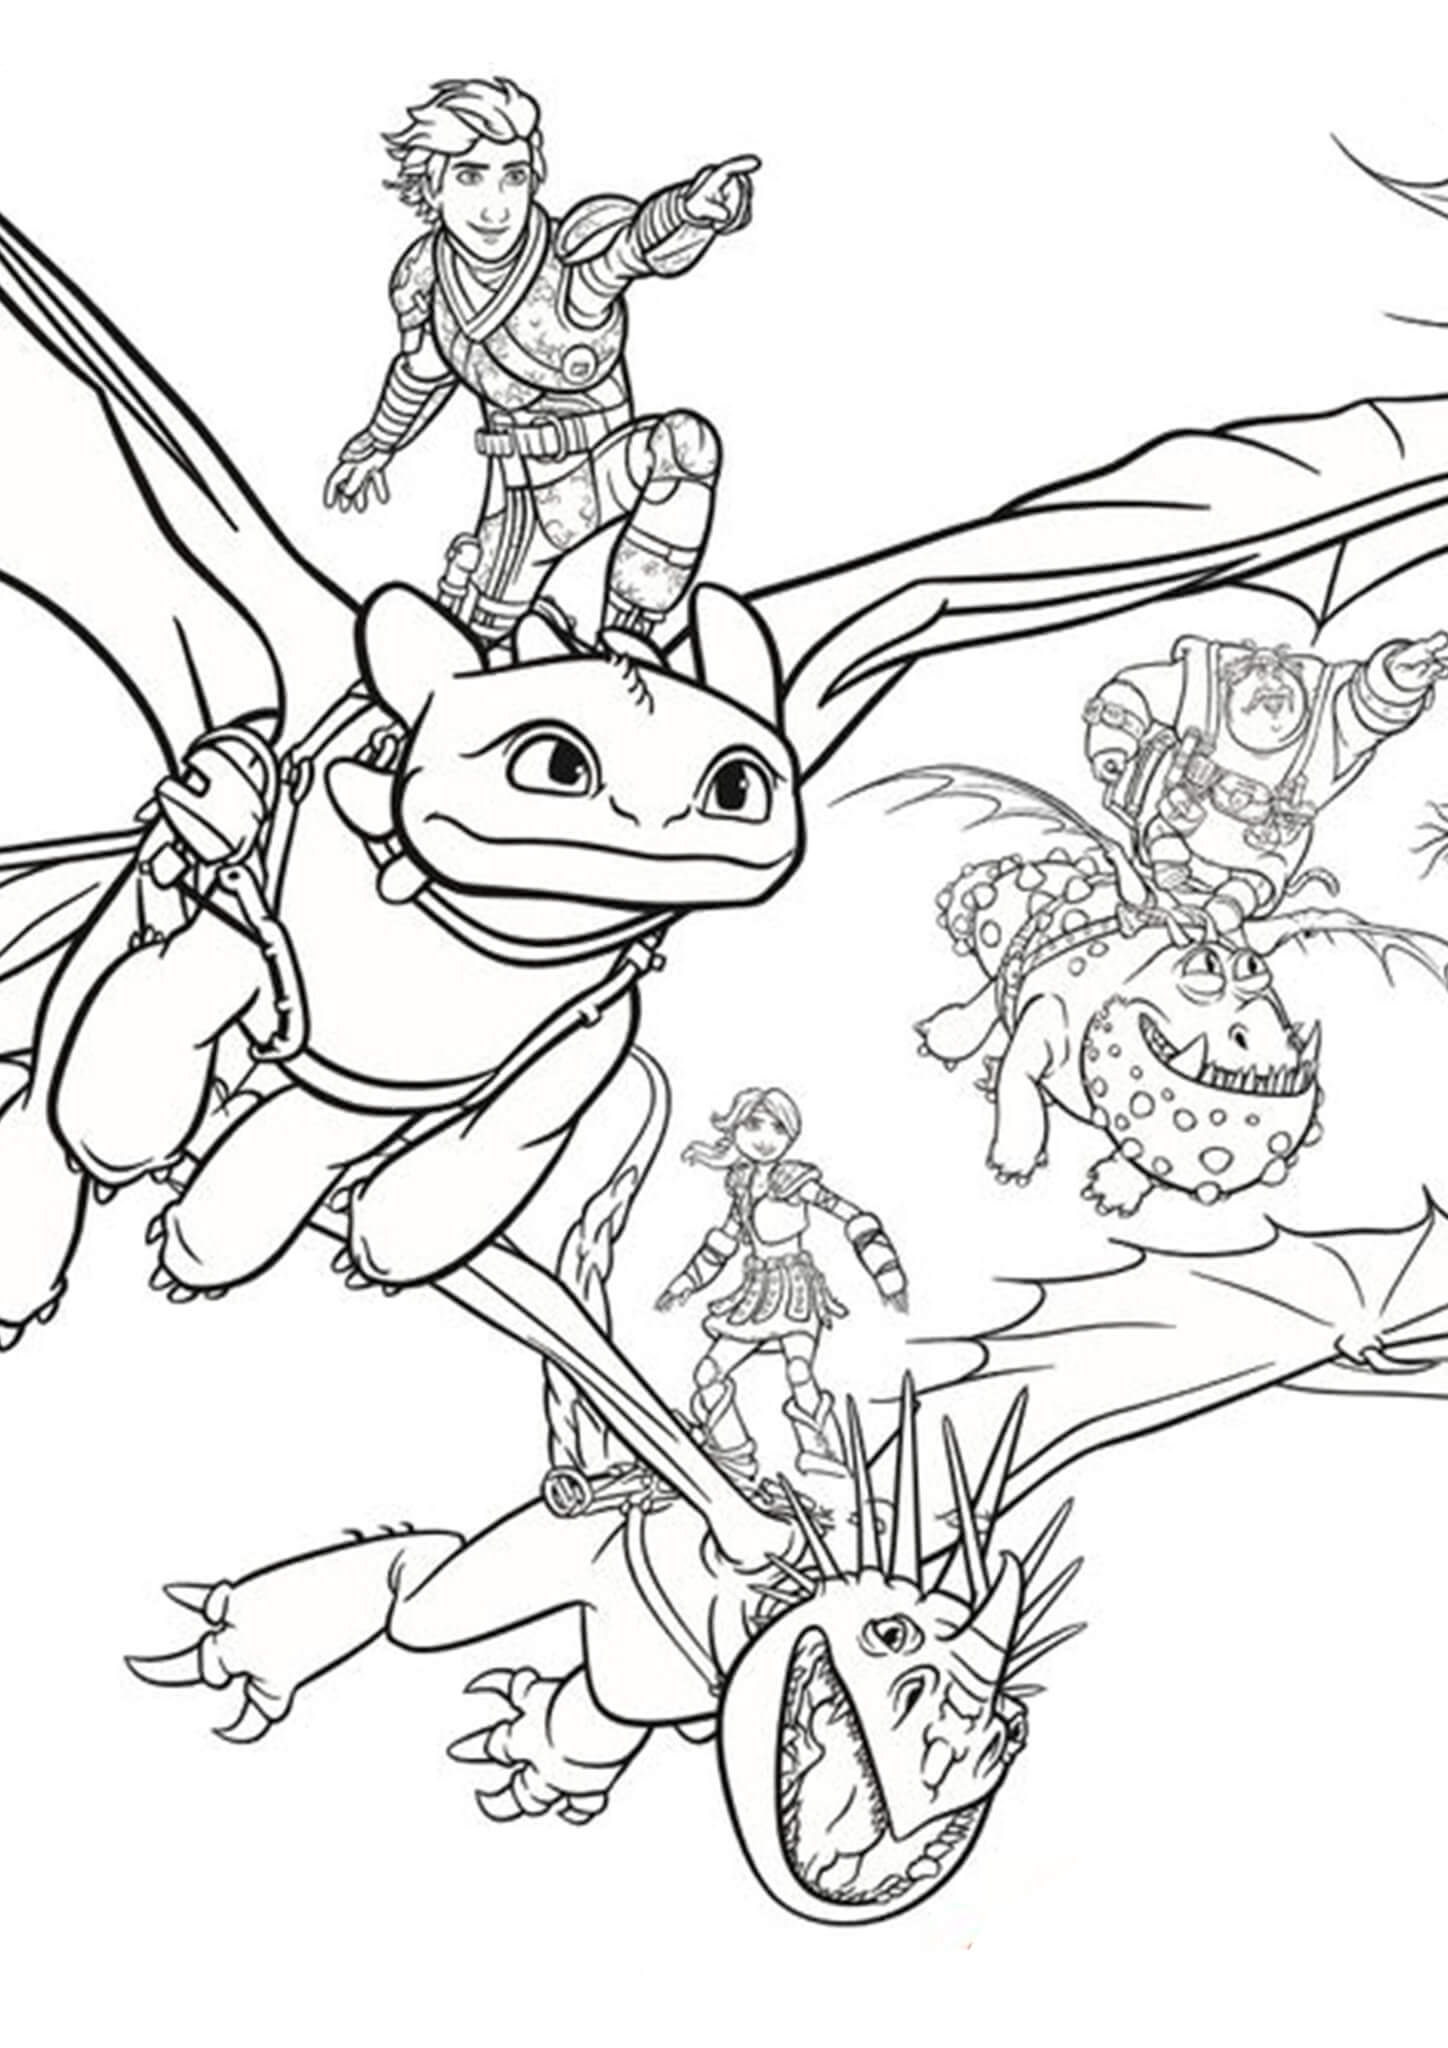 How To Train A Dragon Printable Coloring Pages